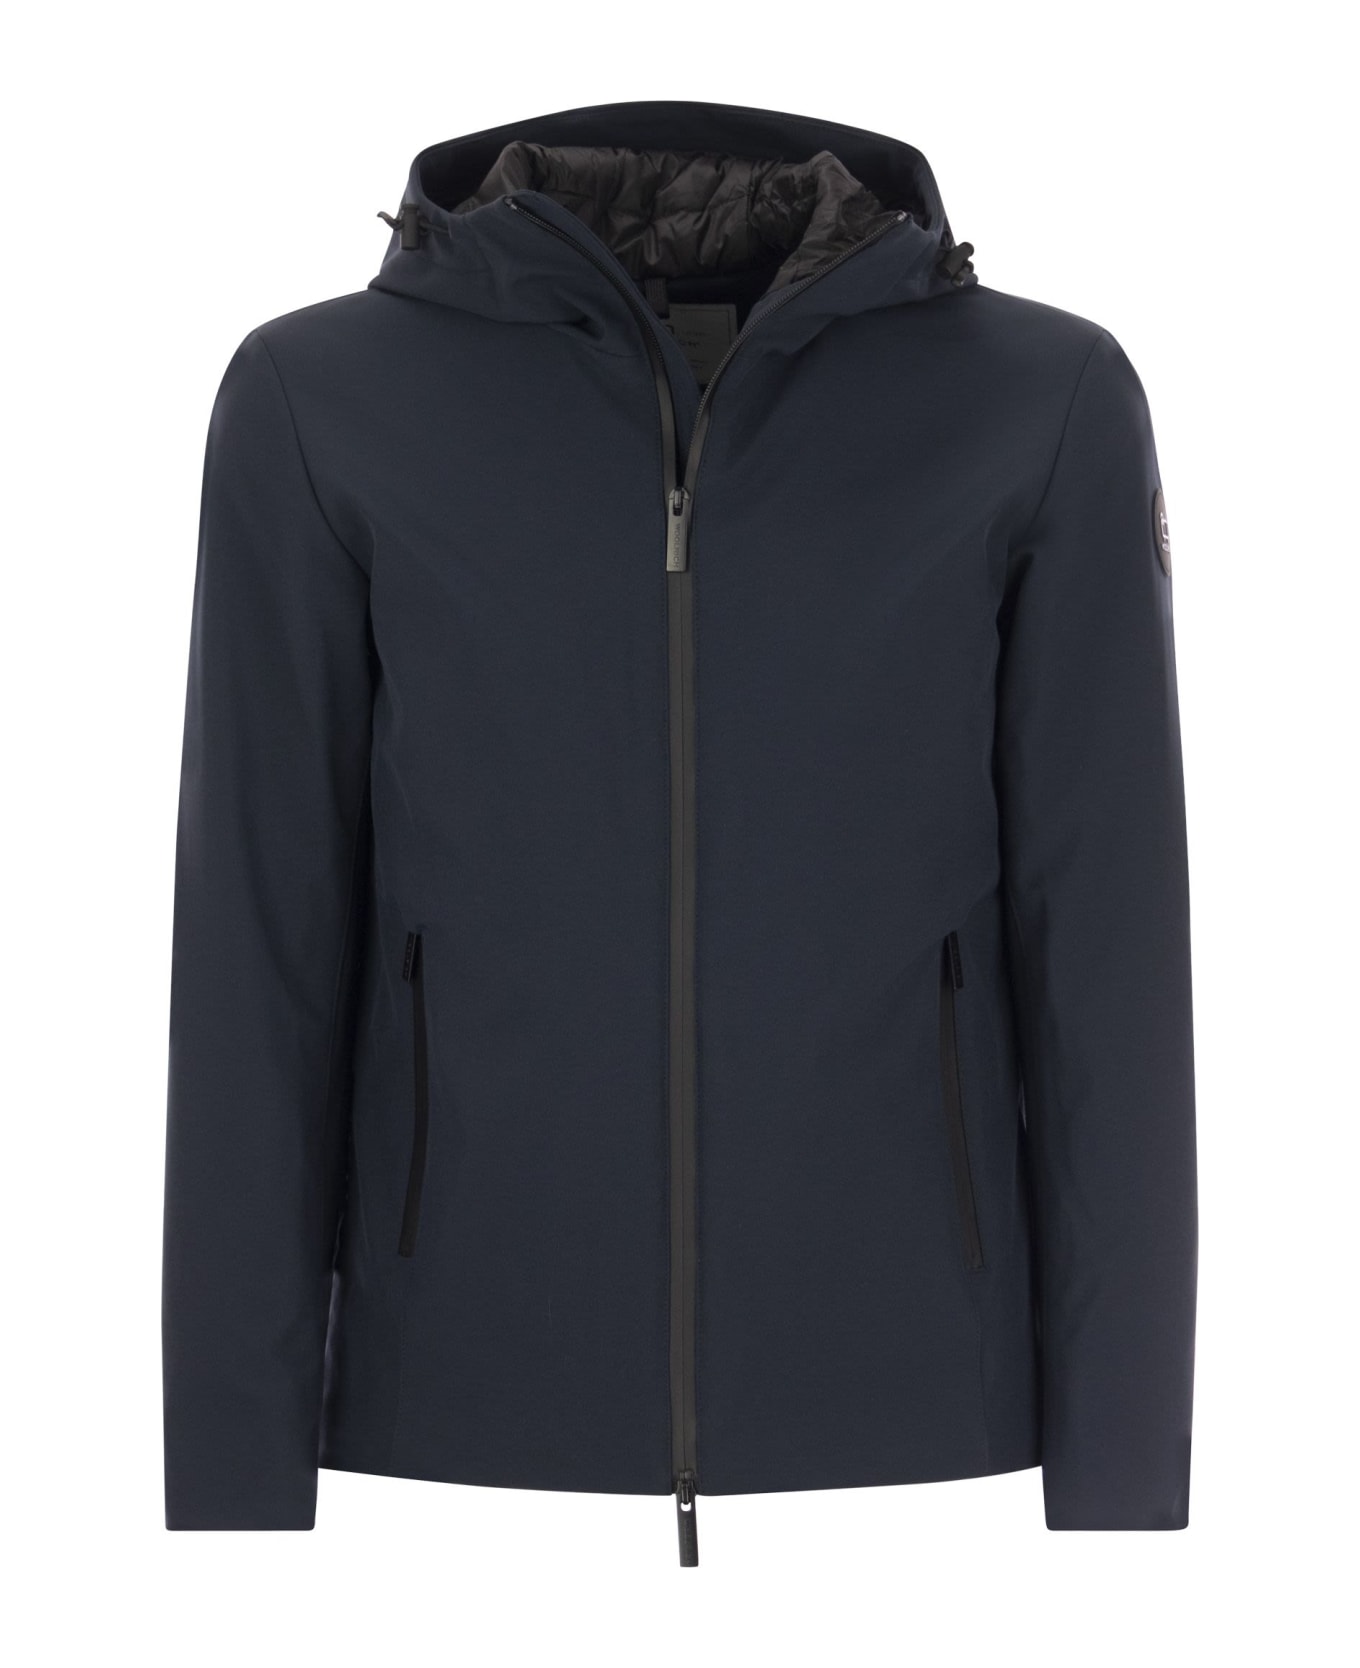 Woolrich Pacific - Softshell Jacket | italist